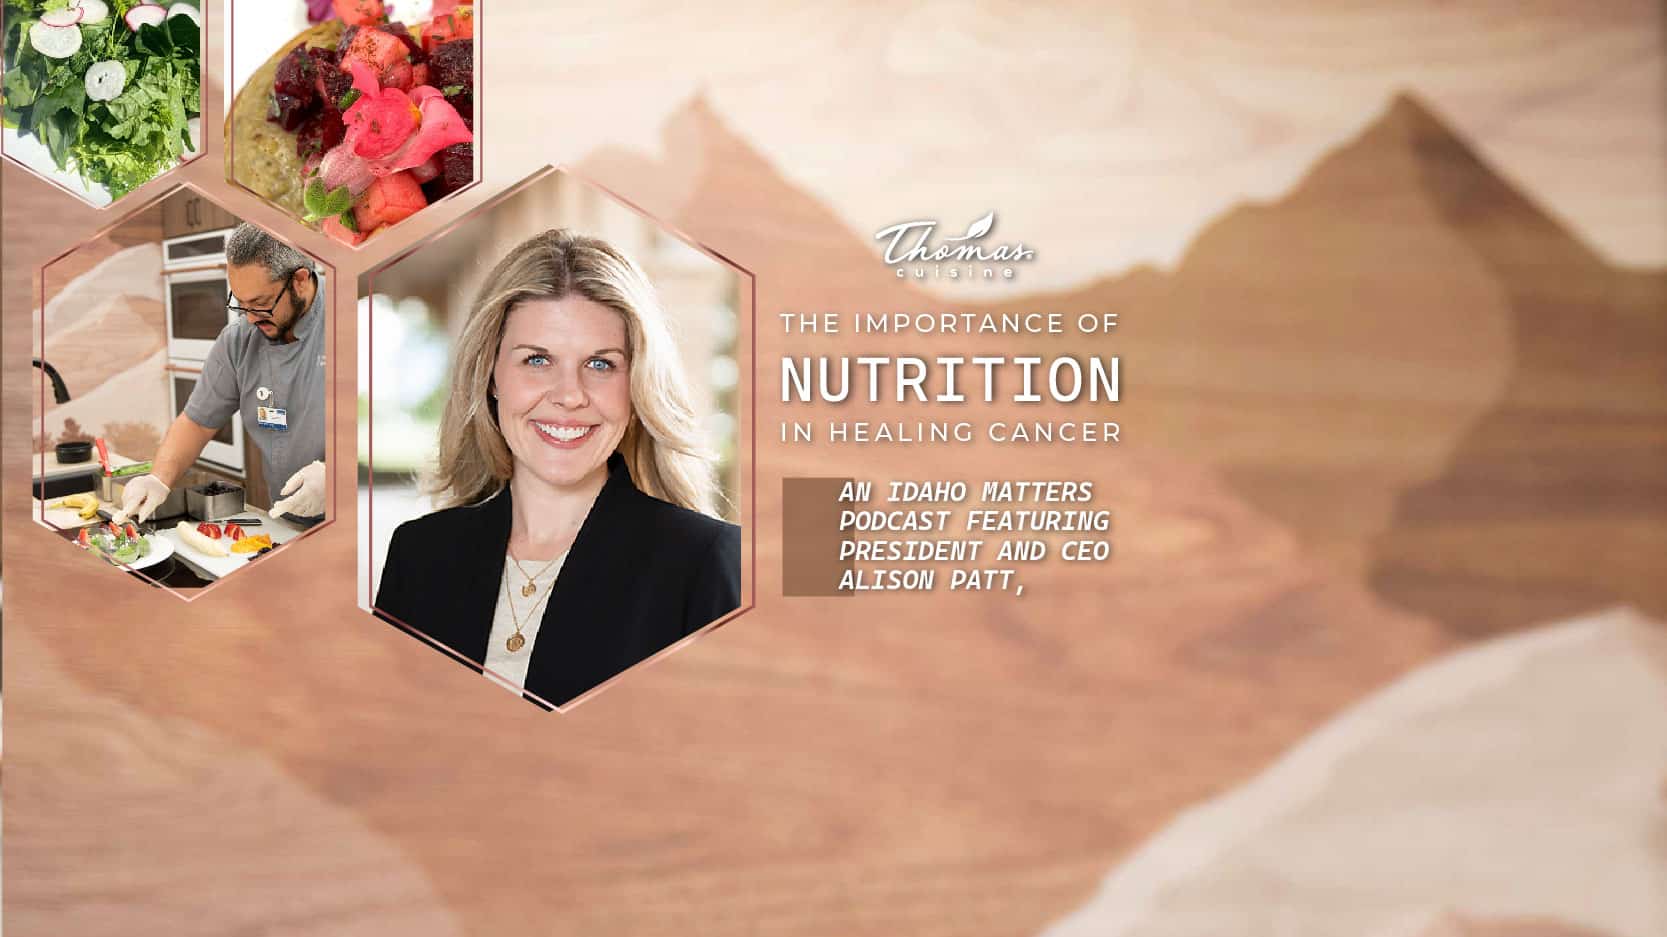 You are currently viewing Thomas Cuisine Presents: Idaho Matters Podcast – The Importance of Nutrition in Healing Cancer Featuring Alison Patt, President & CEO of Thomas Cuisine